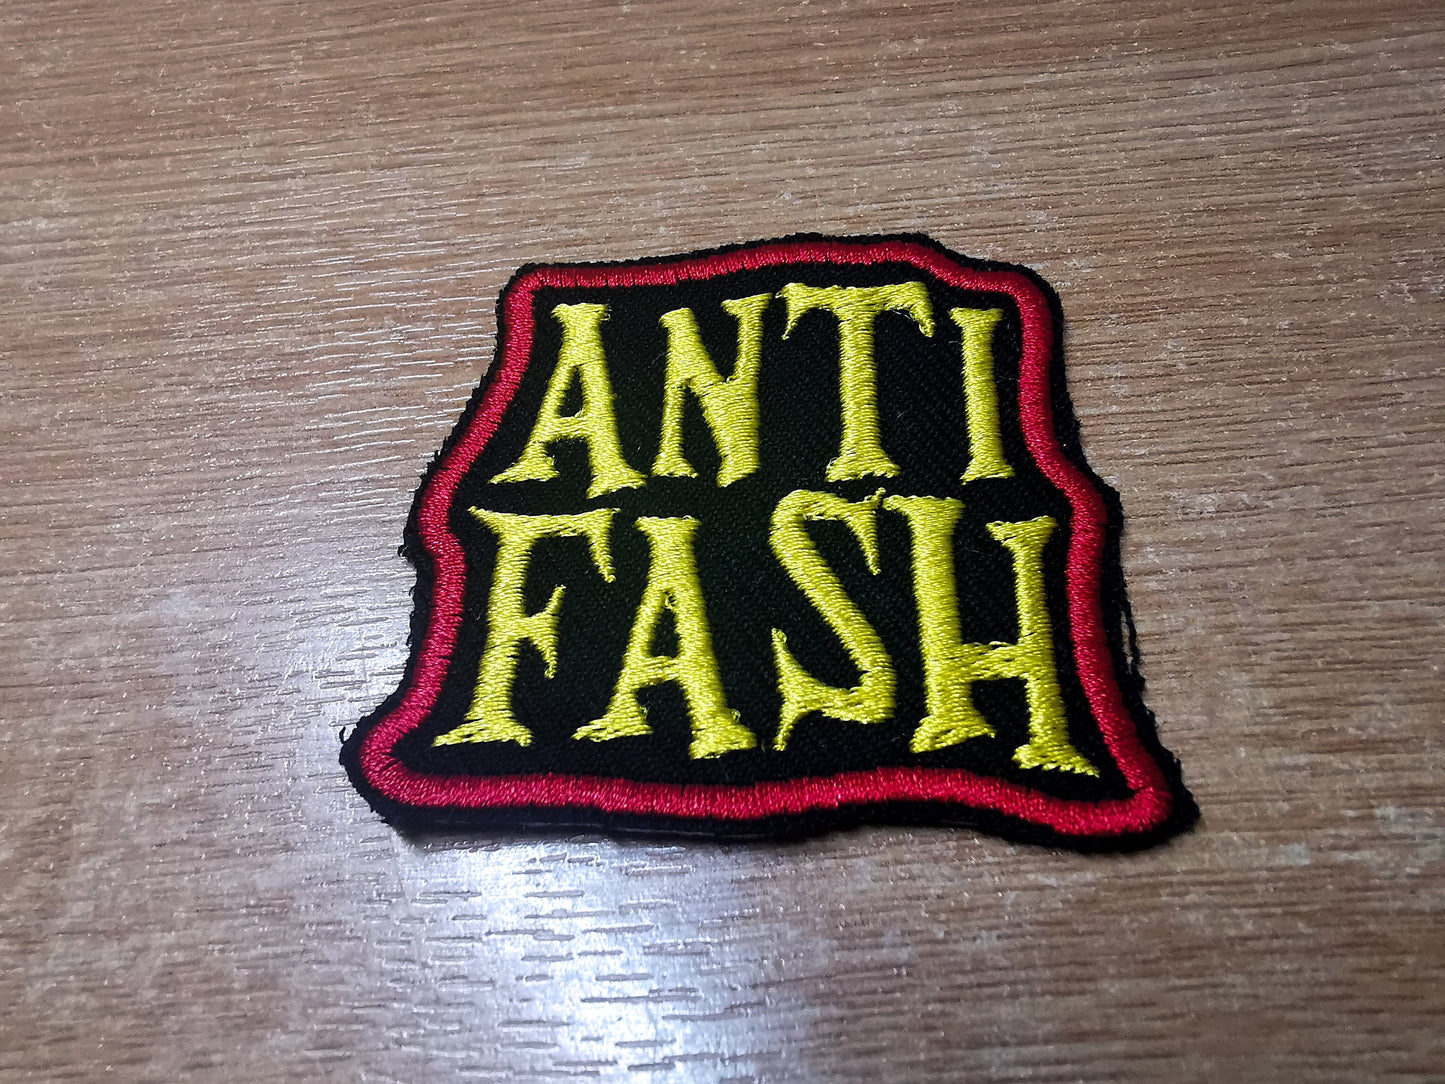 Anti Fash Antifacist Embroidered Iron On Patch Politics Punk Red and Yellow